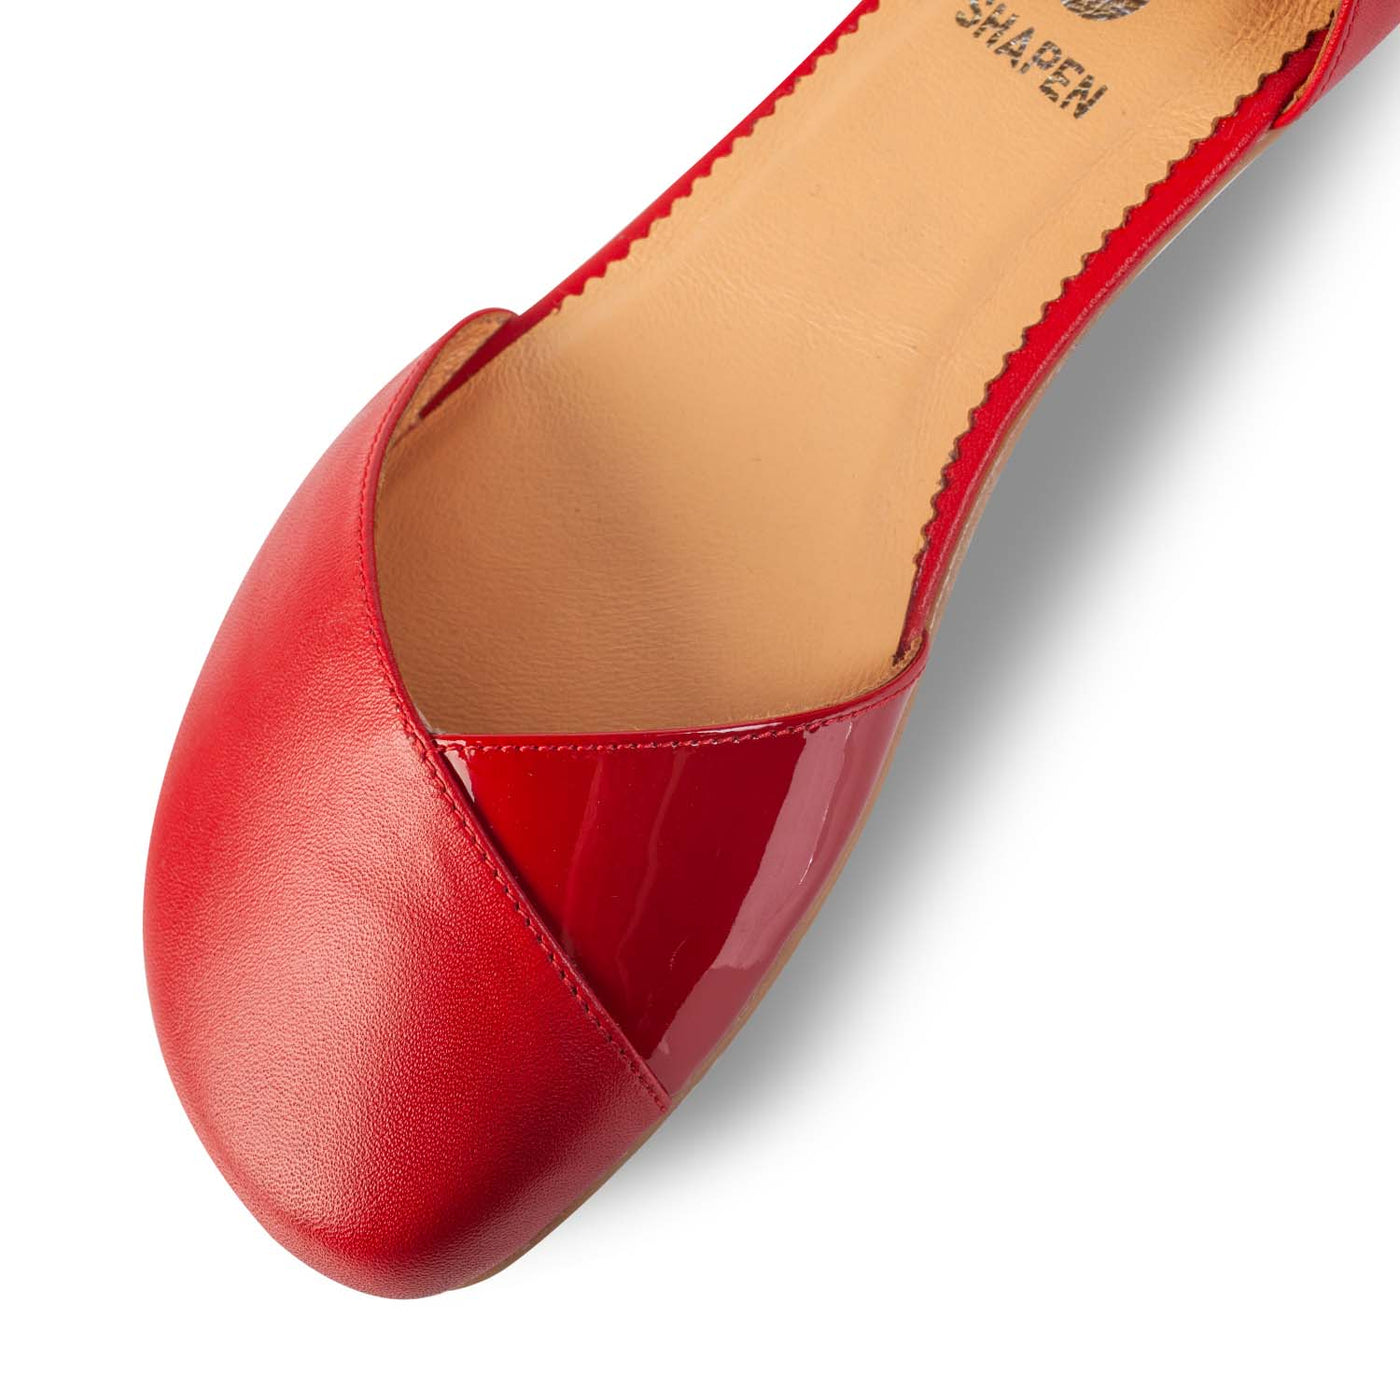 A photo of Shapen Poppy D’orsay dressy flats with a leather upper and rubber soles. The flats are a cherry red color with a heel cup and dainty ankle strap, the inside of the sole are a beige color. The right shoe is shown up close from the front against a white background. #color_red